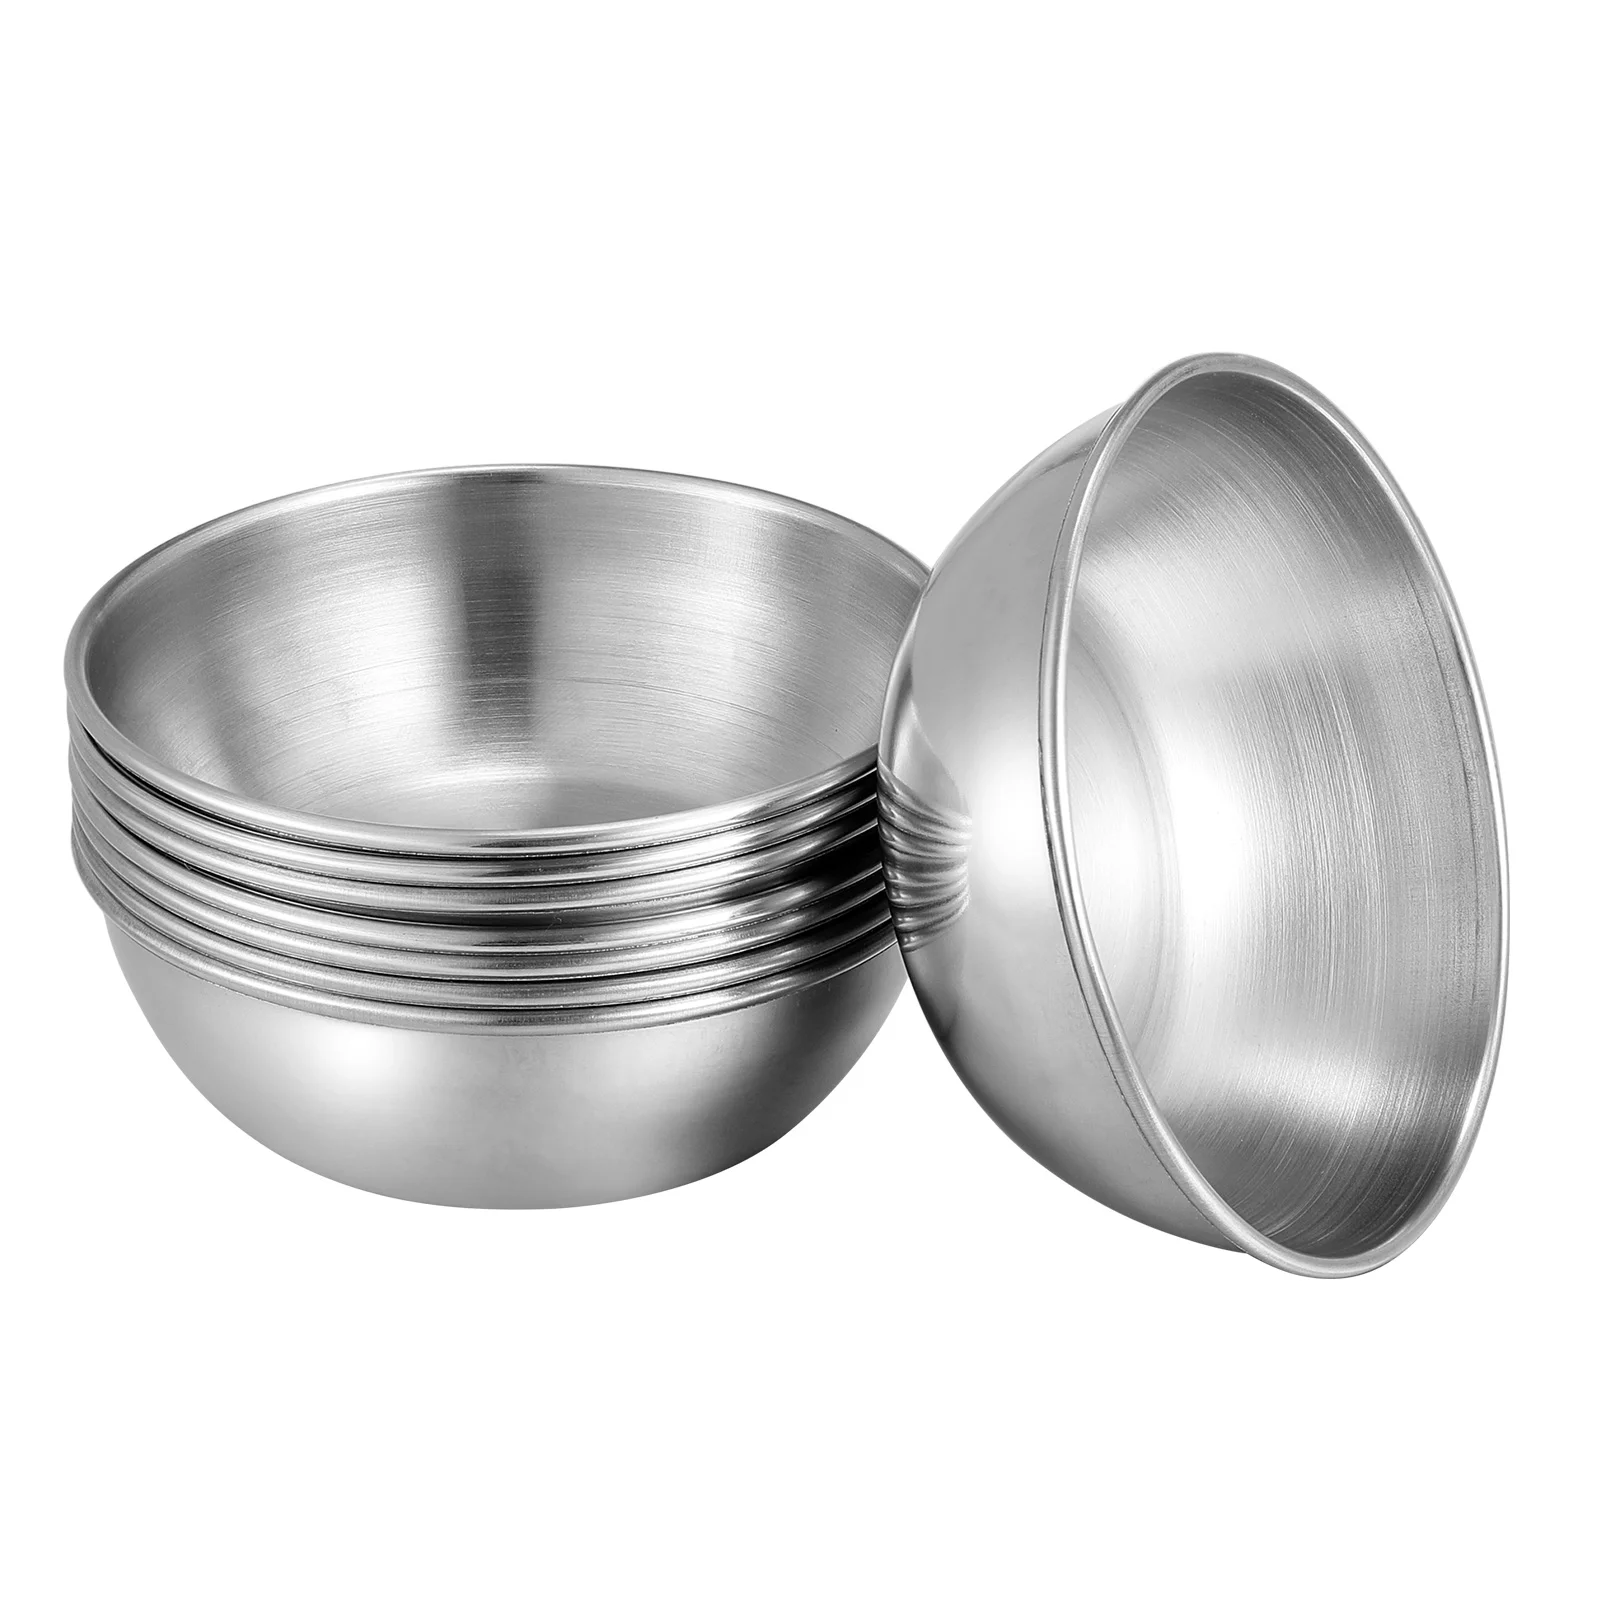 UPKOCH 4pcs Sauce Dishes Dipping Bowls Stainless Steel Seasoning Dishes Saucers Bowl Appetizer Plates 